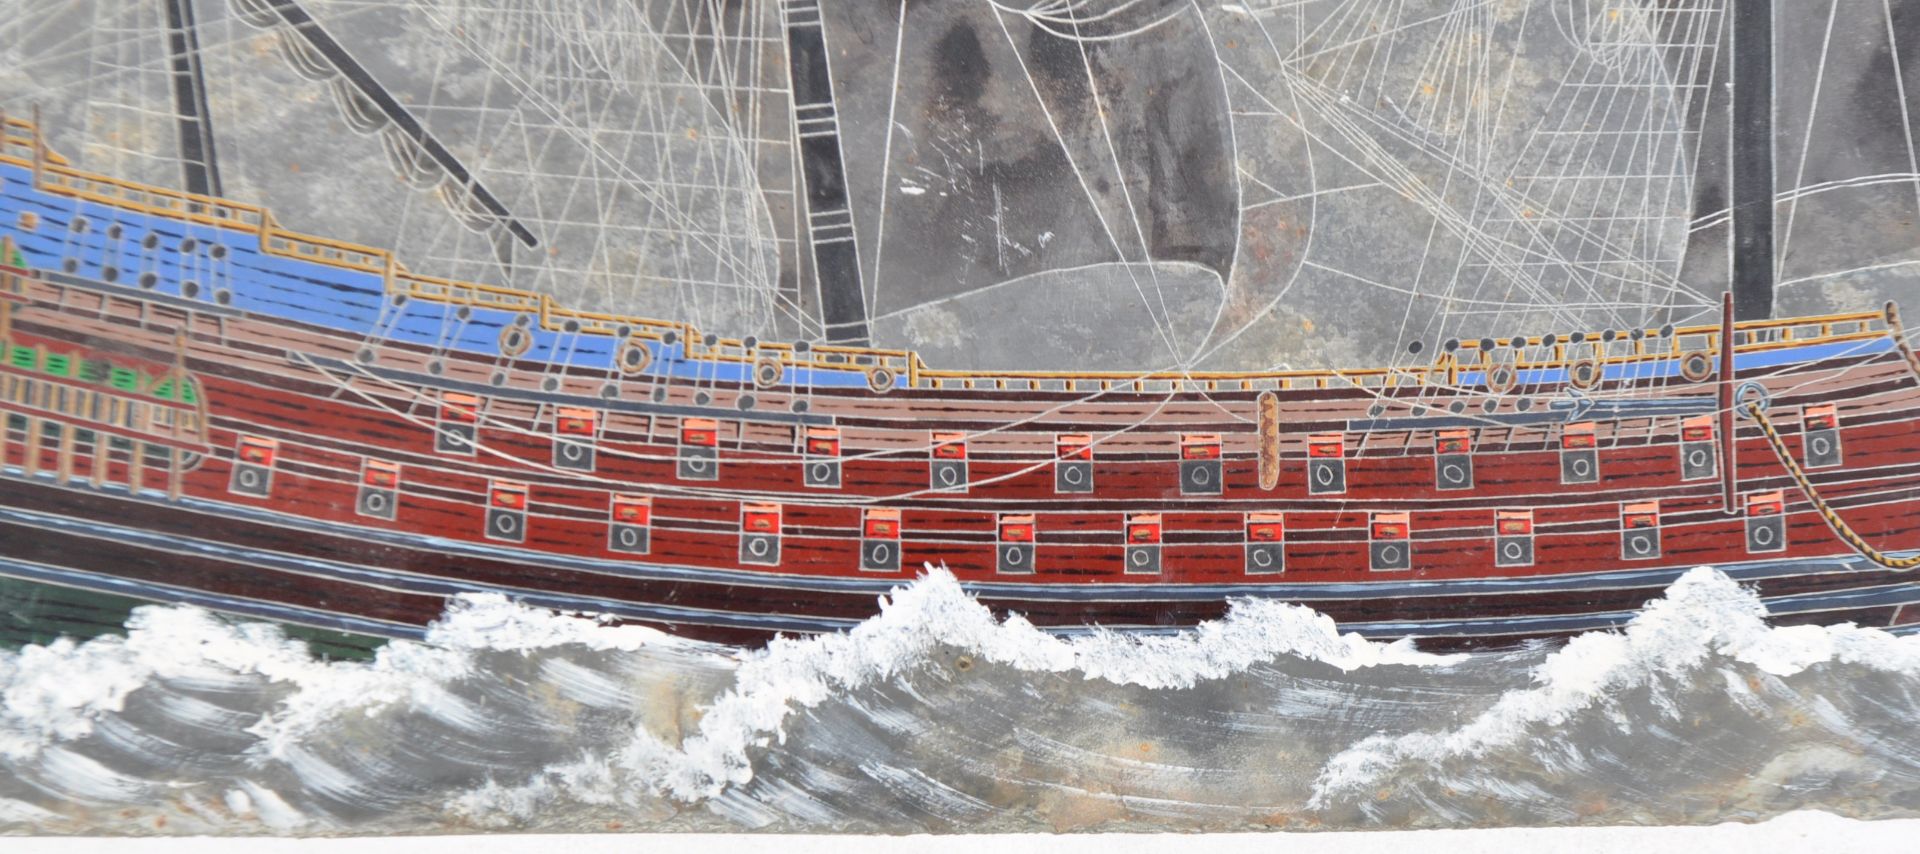 SLATE PANEL WITH HAND PAINTED 17TH CENTURY SWEDISH GALLEON - Image 5 of 6